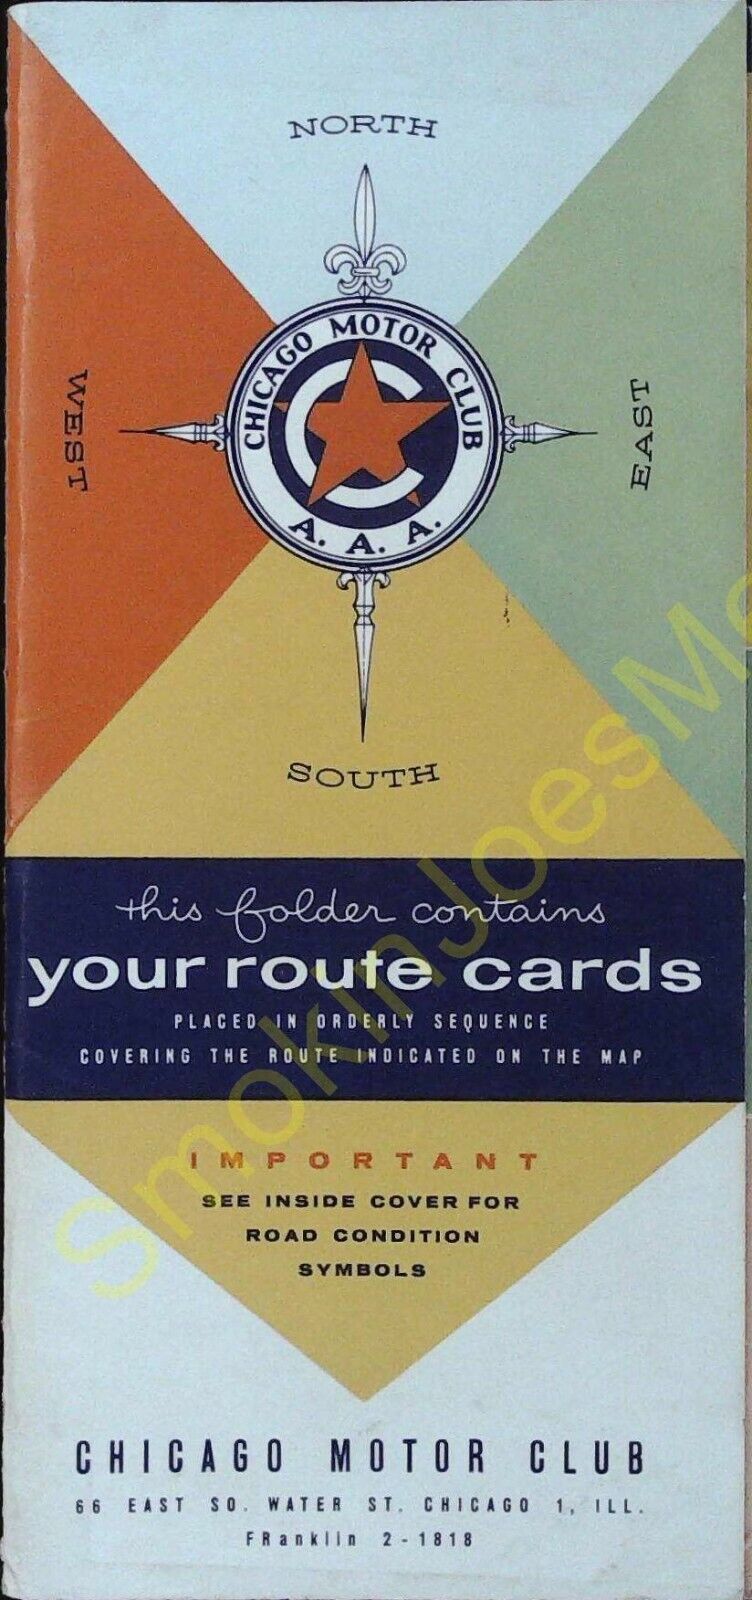 Vintage Travel Brochure Chicago Motor Club Travel Route Cards 1950\'s/1960\'s ?